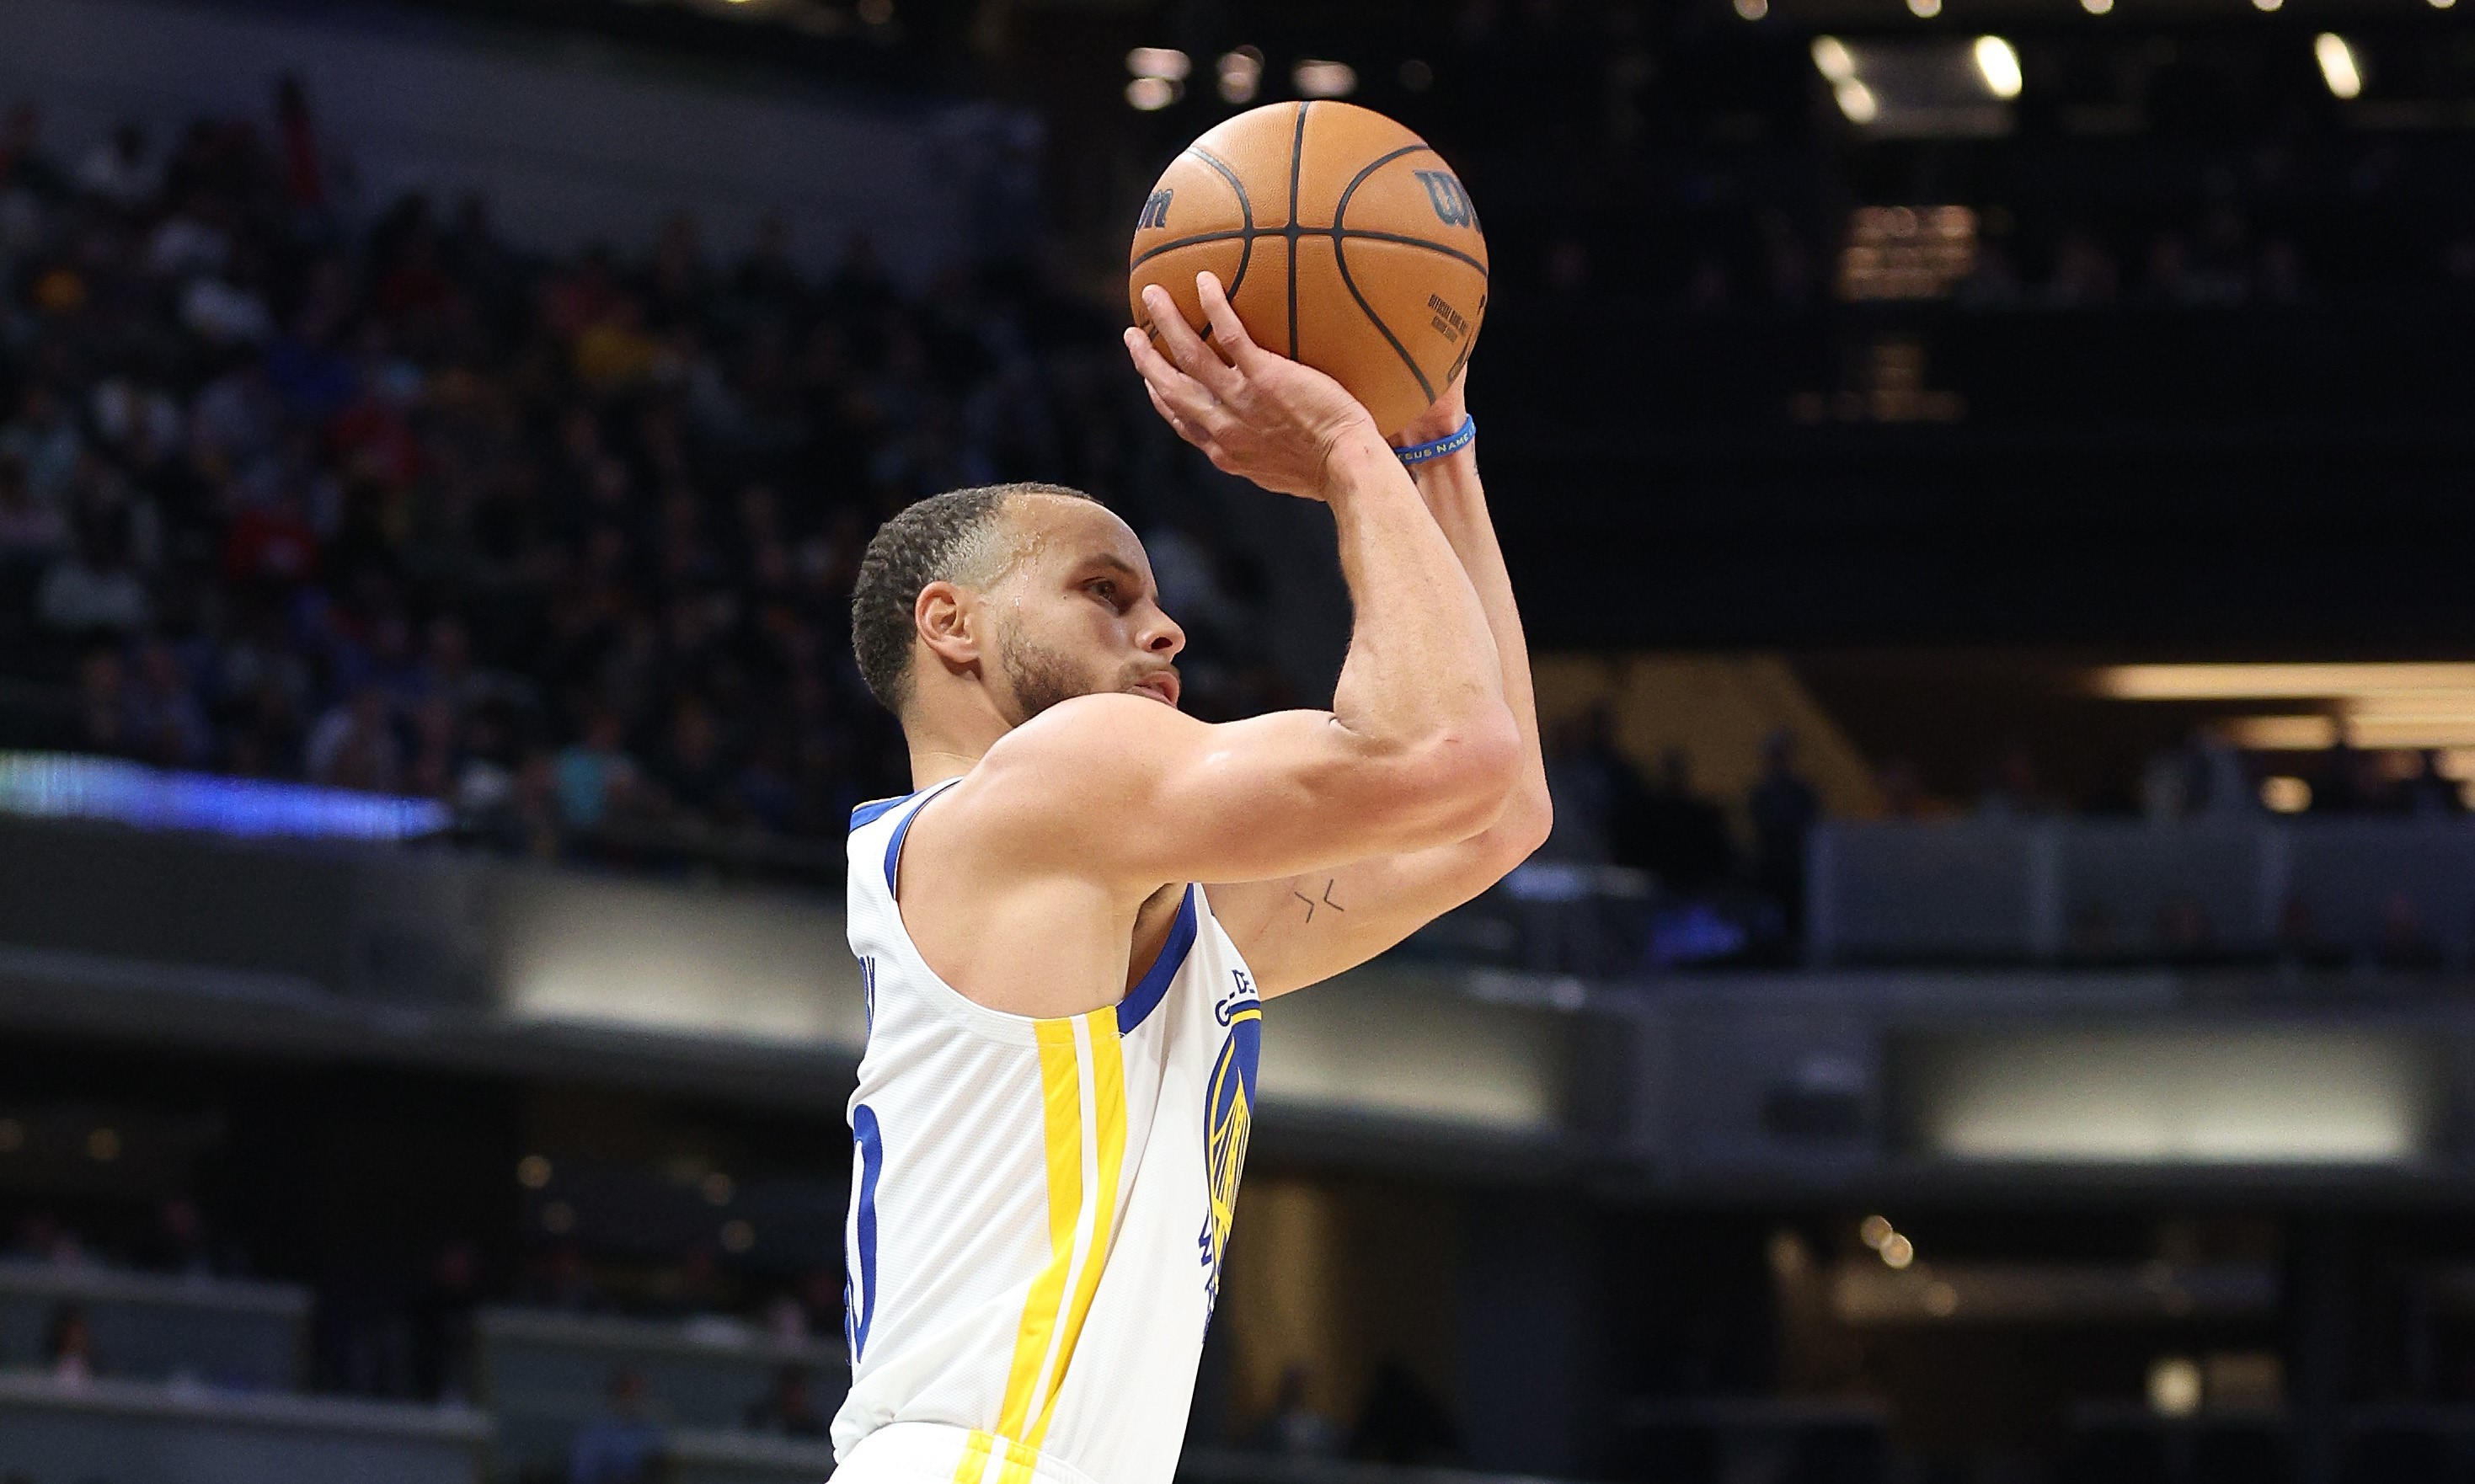 Stephen Curry A Record And The Revolution Of The Triple That Changed